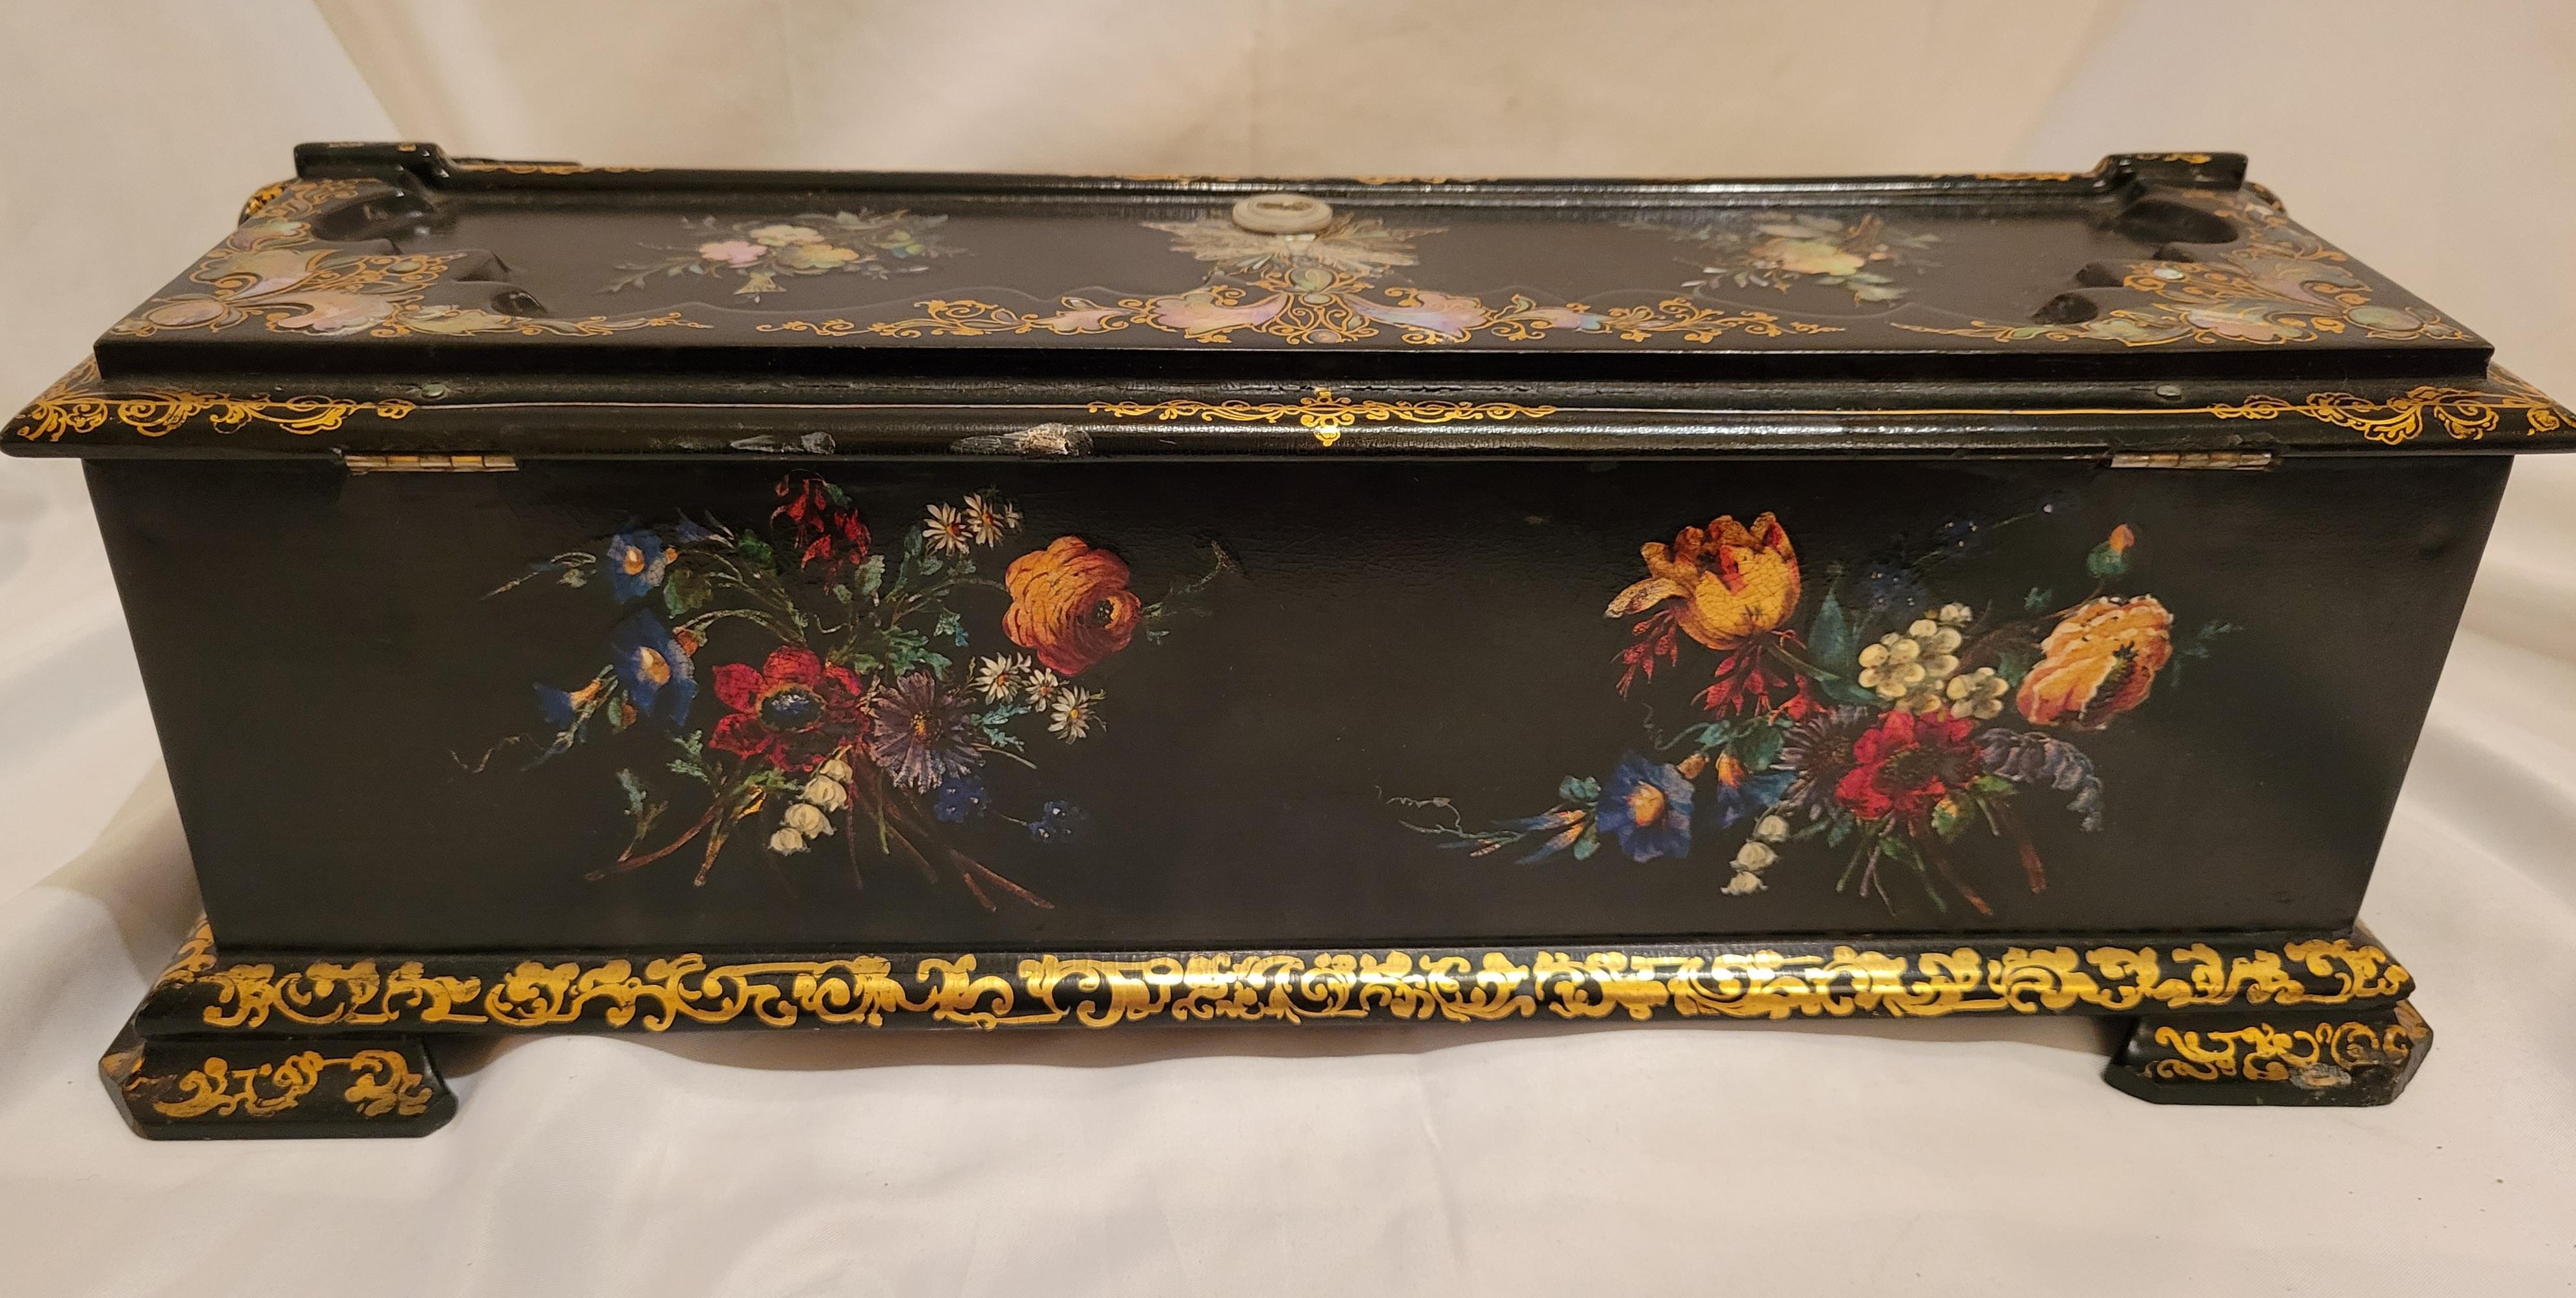 Antique English Exceptional Lacquer Mother-of-Pearl Travel Desk, circa 1860-1870 For Sale 2